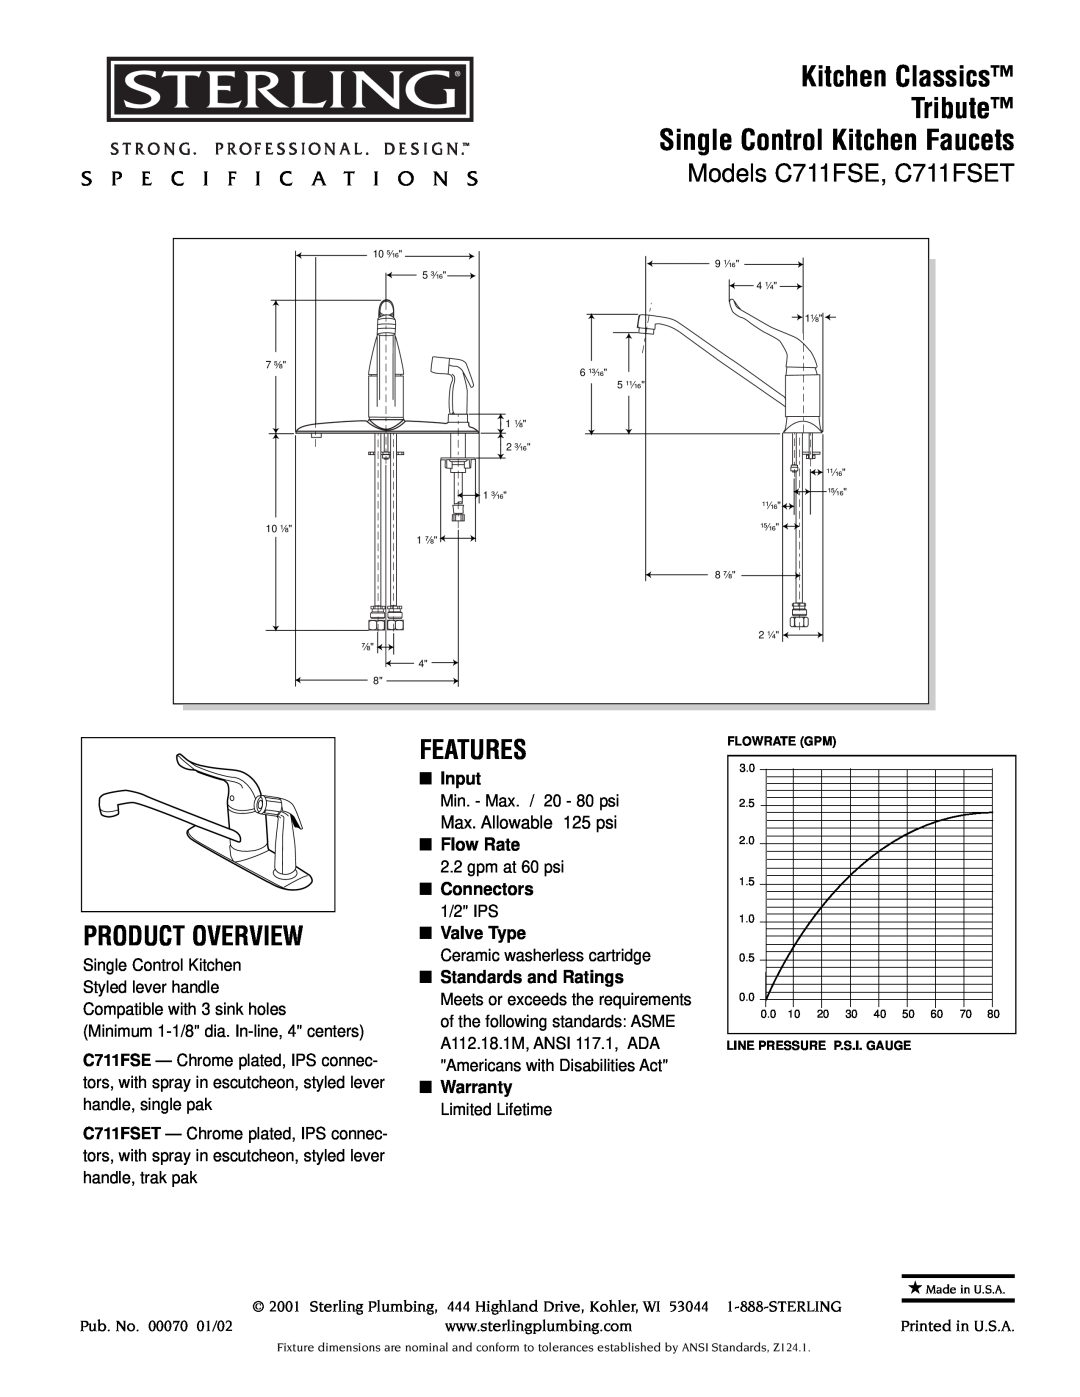 Sterling Plumbing C711FSE specifications Kitchen Classics, Tribute, Single Control Kitchen Faucets, Product Overview 